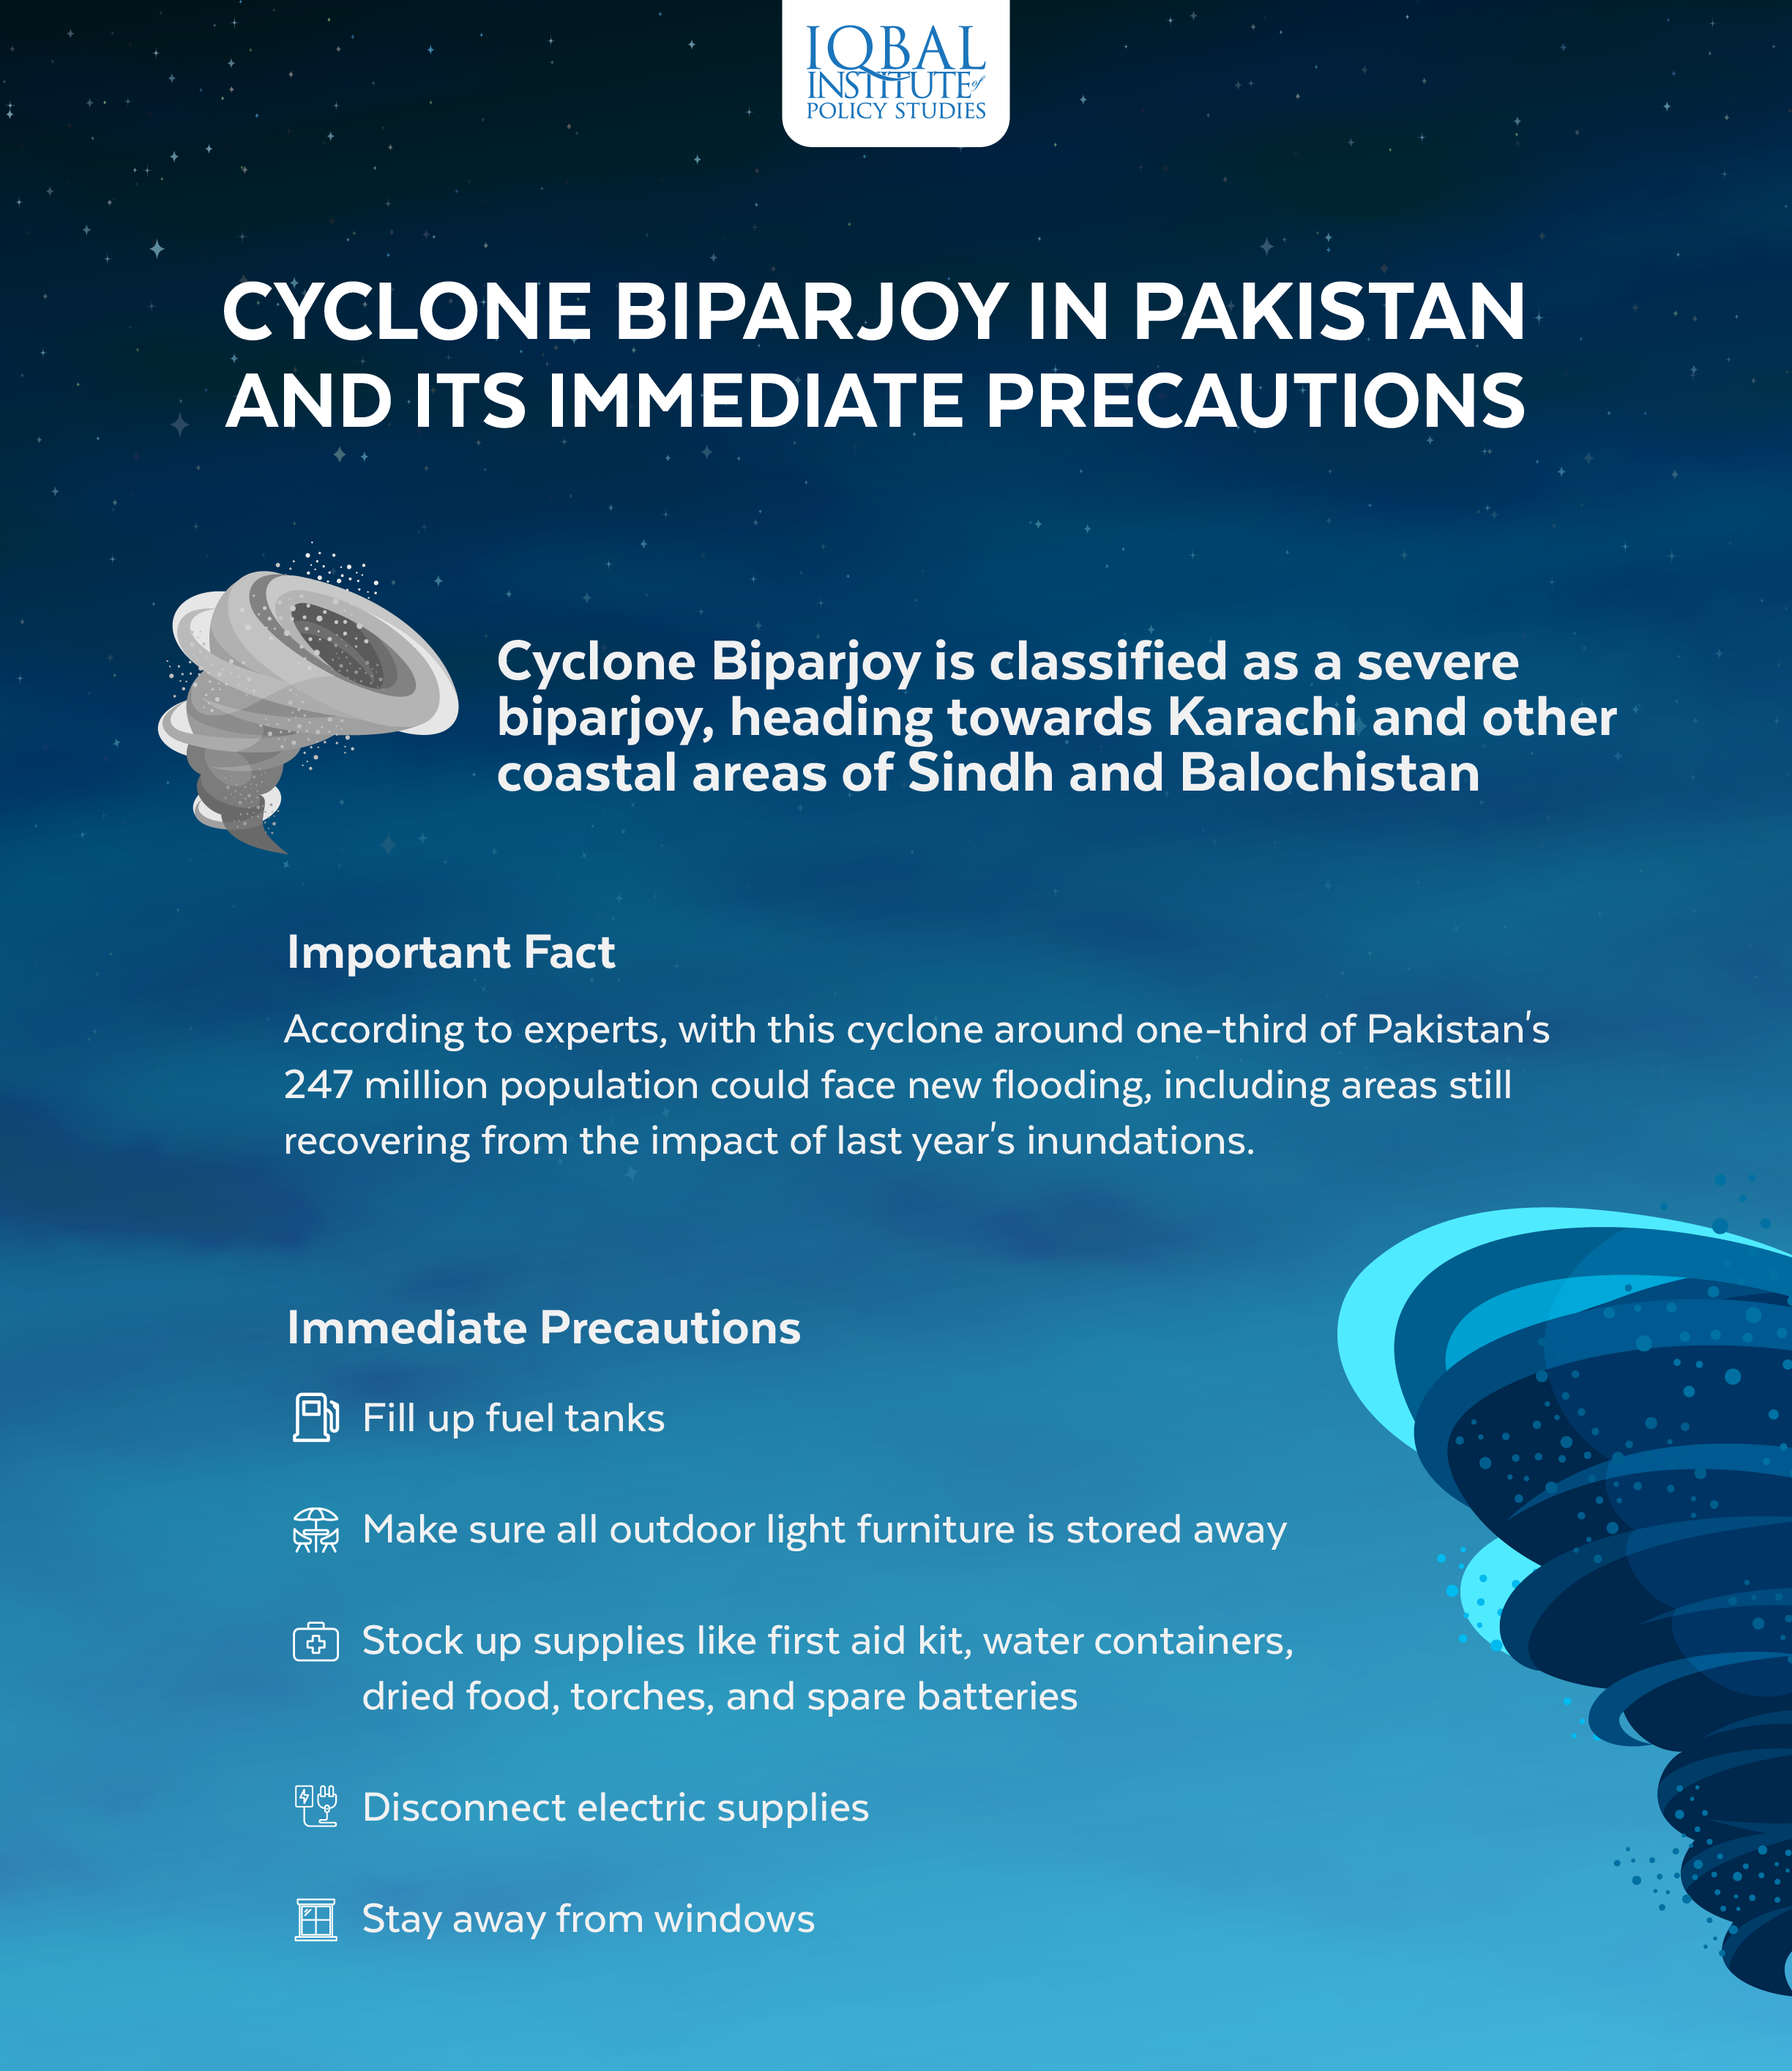 Cyclone Biparjoy in Pakistan and Its Immediate Precautions